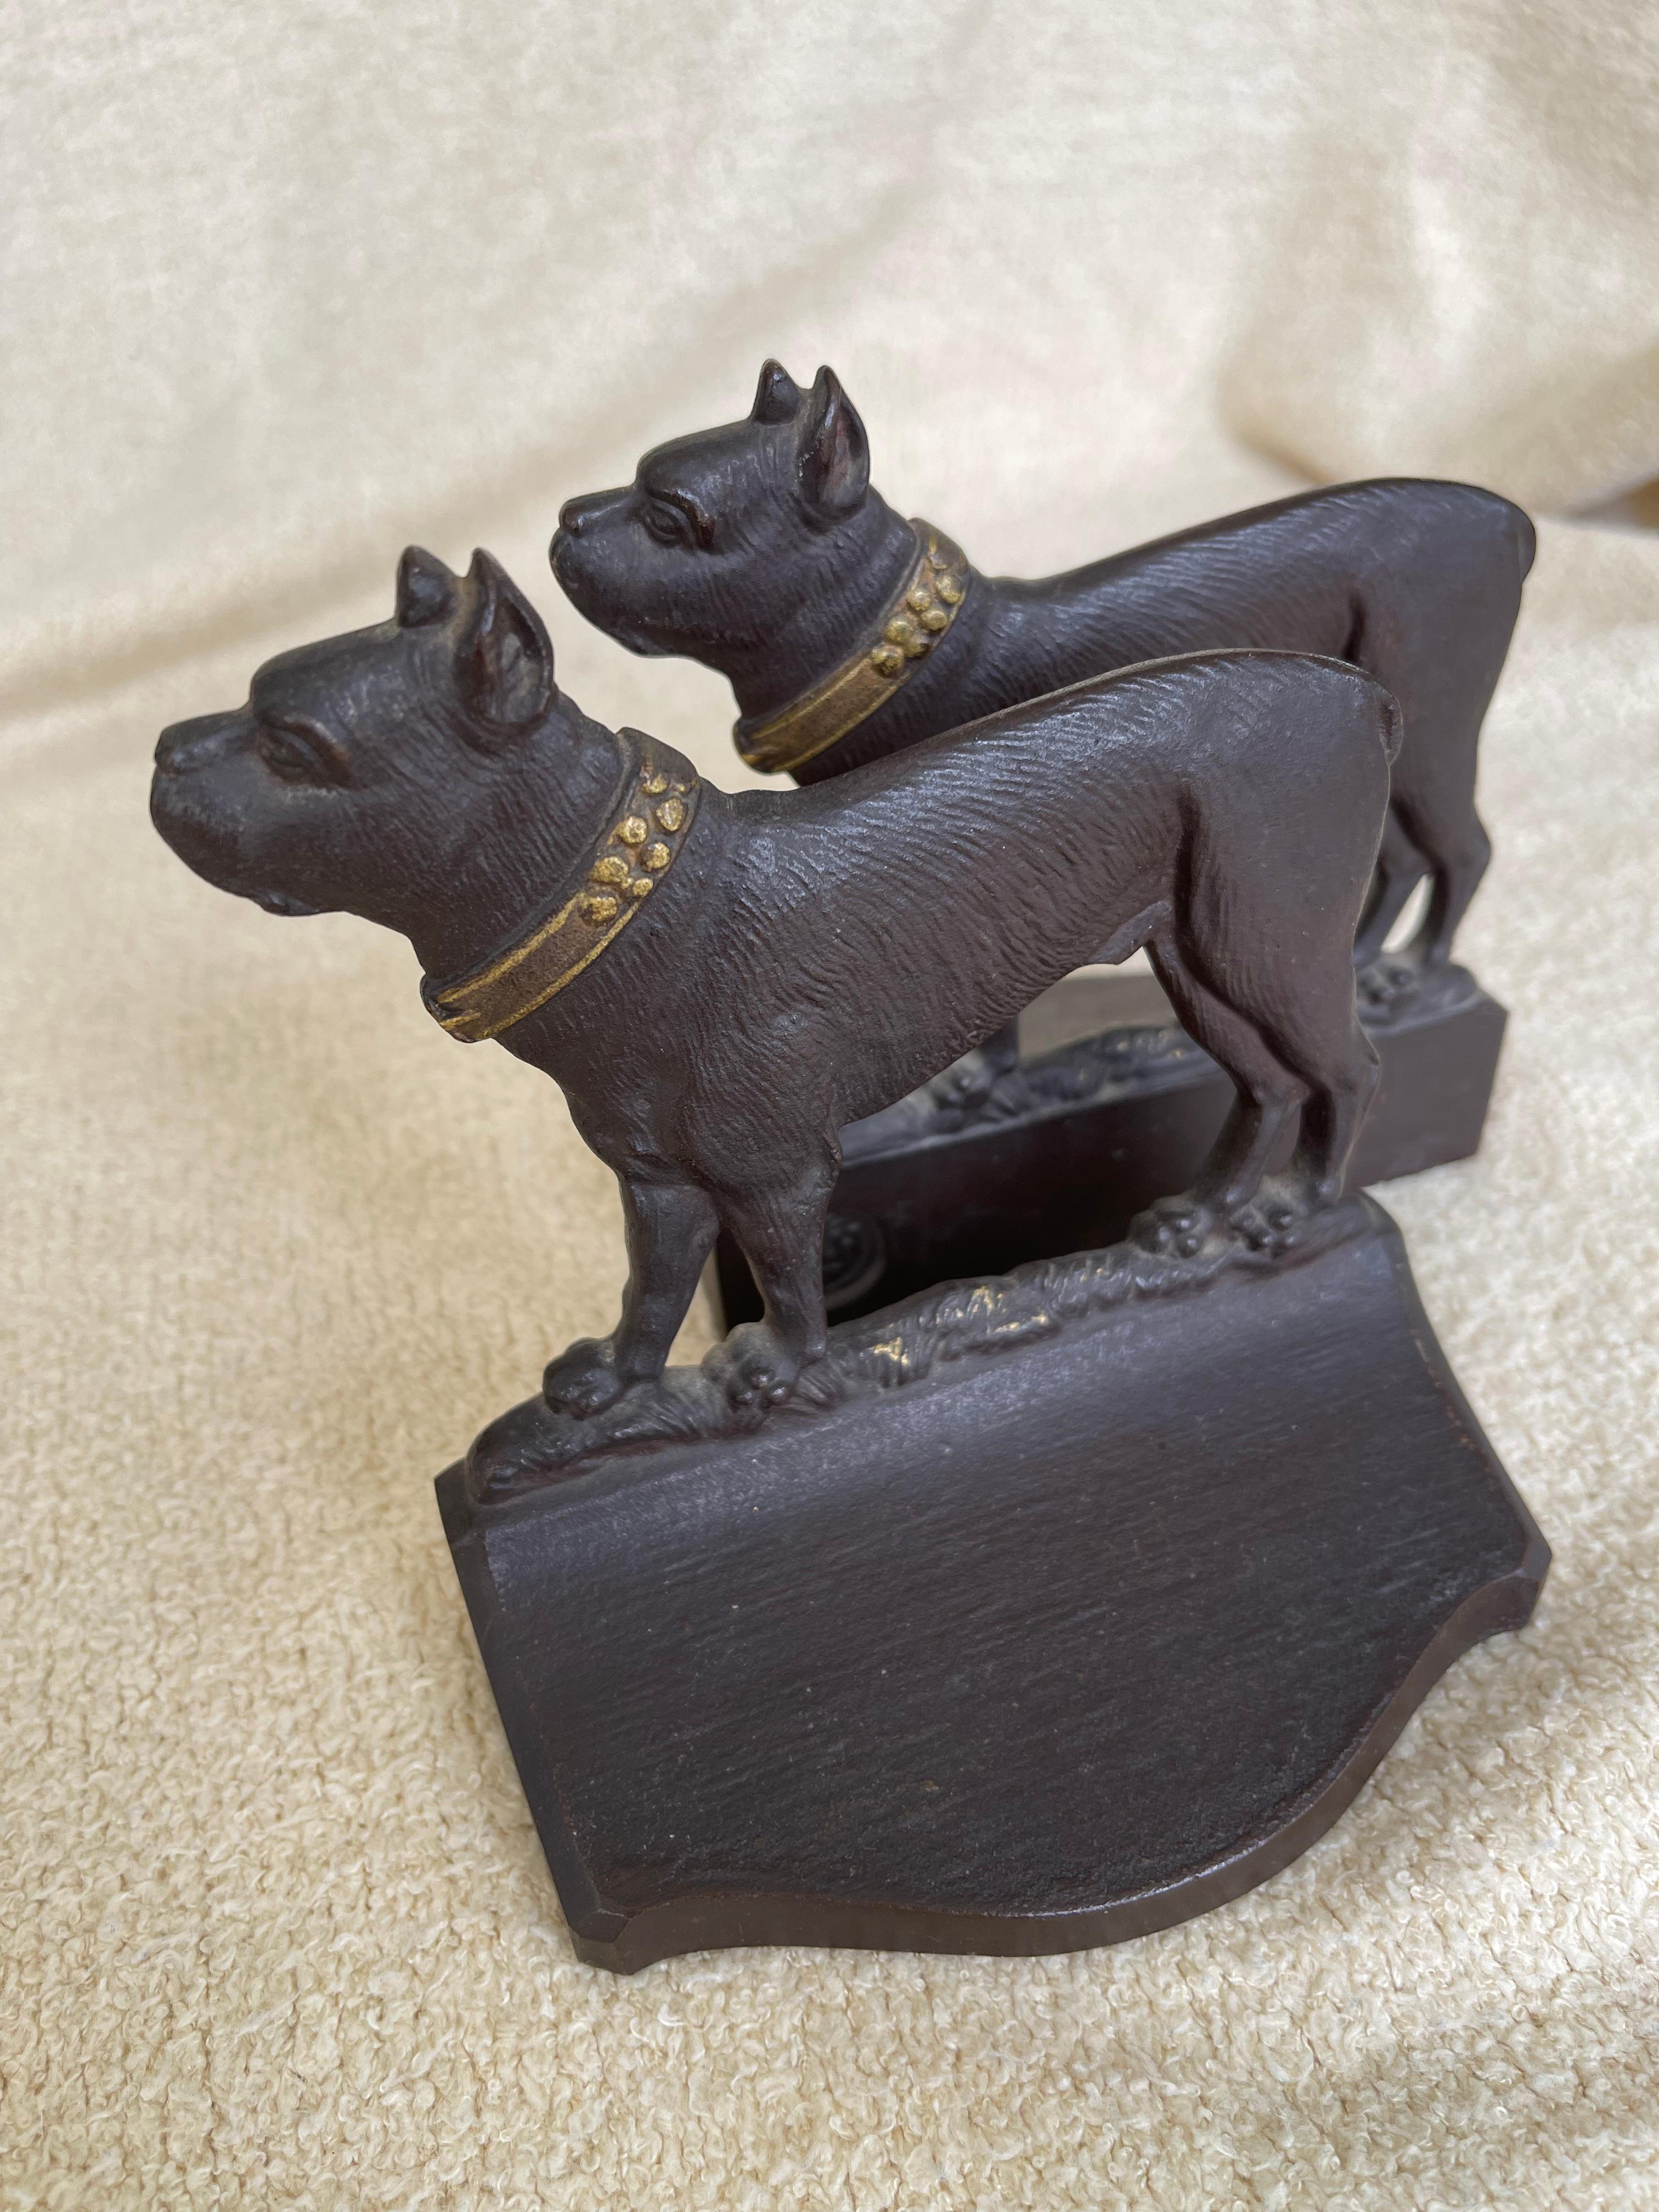 American Pair of Boston Terrier Cast Iron Bookends by Bradley & Hubbard, ca. 1920